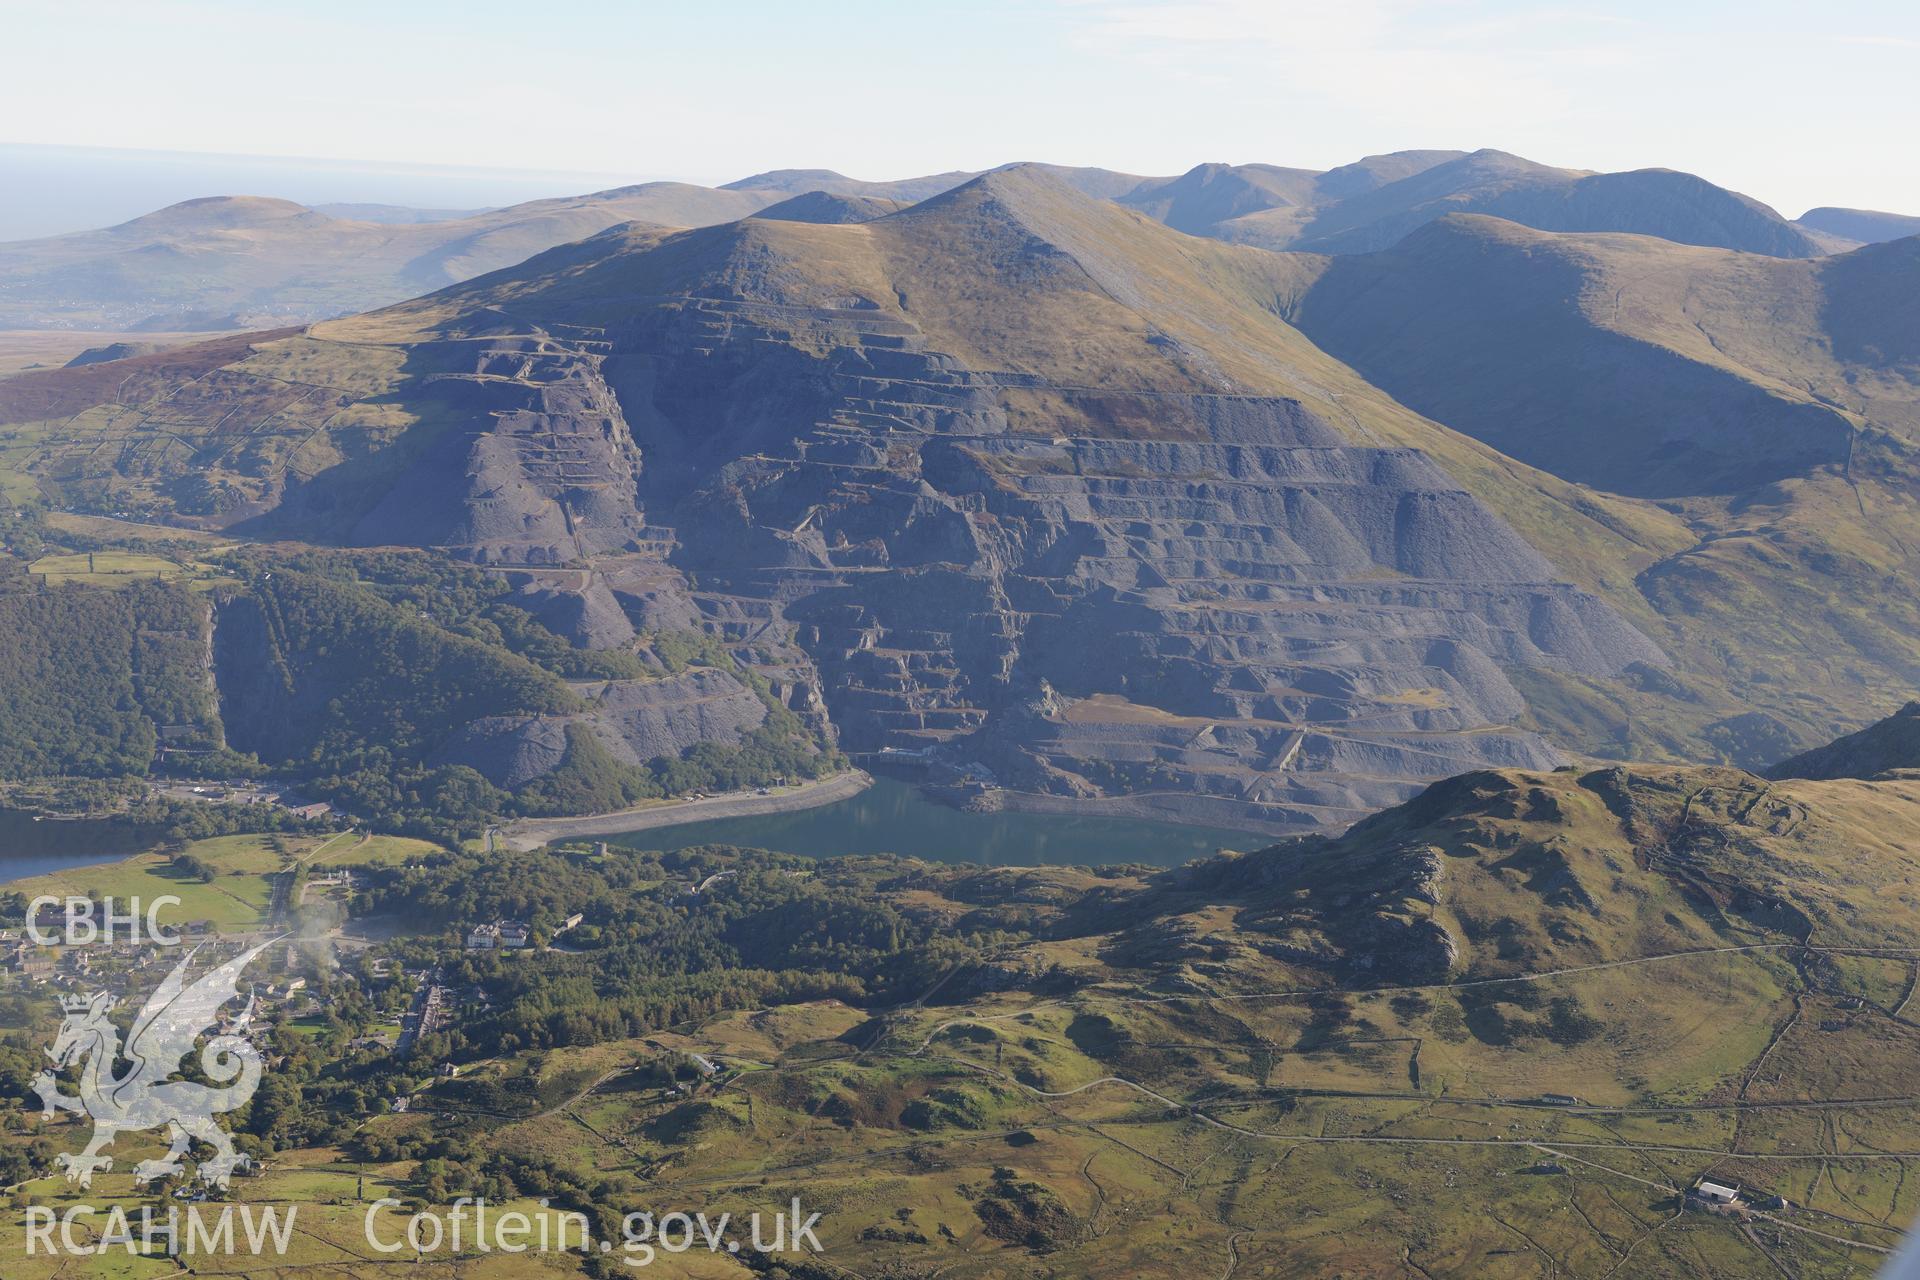 Dinorwic slate quarry and the town of Llanberis. Oblique aerial photograph taken during the Royal Commission's programme of archaeological aerial reconnaissance by Toby Driver on 2nd October 2015.